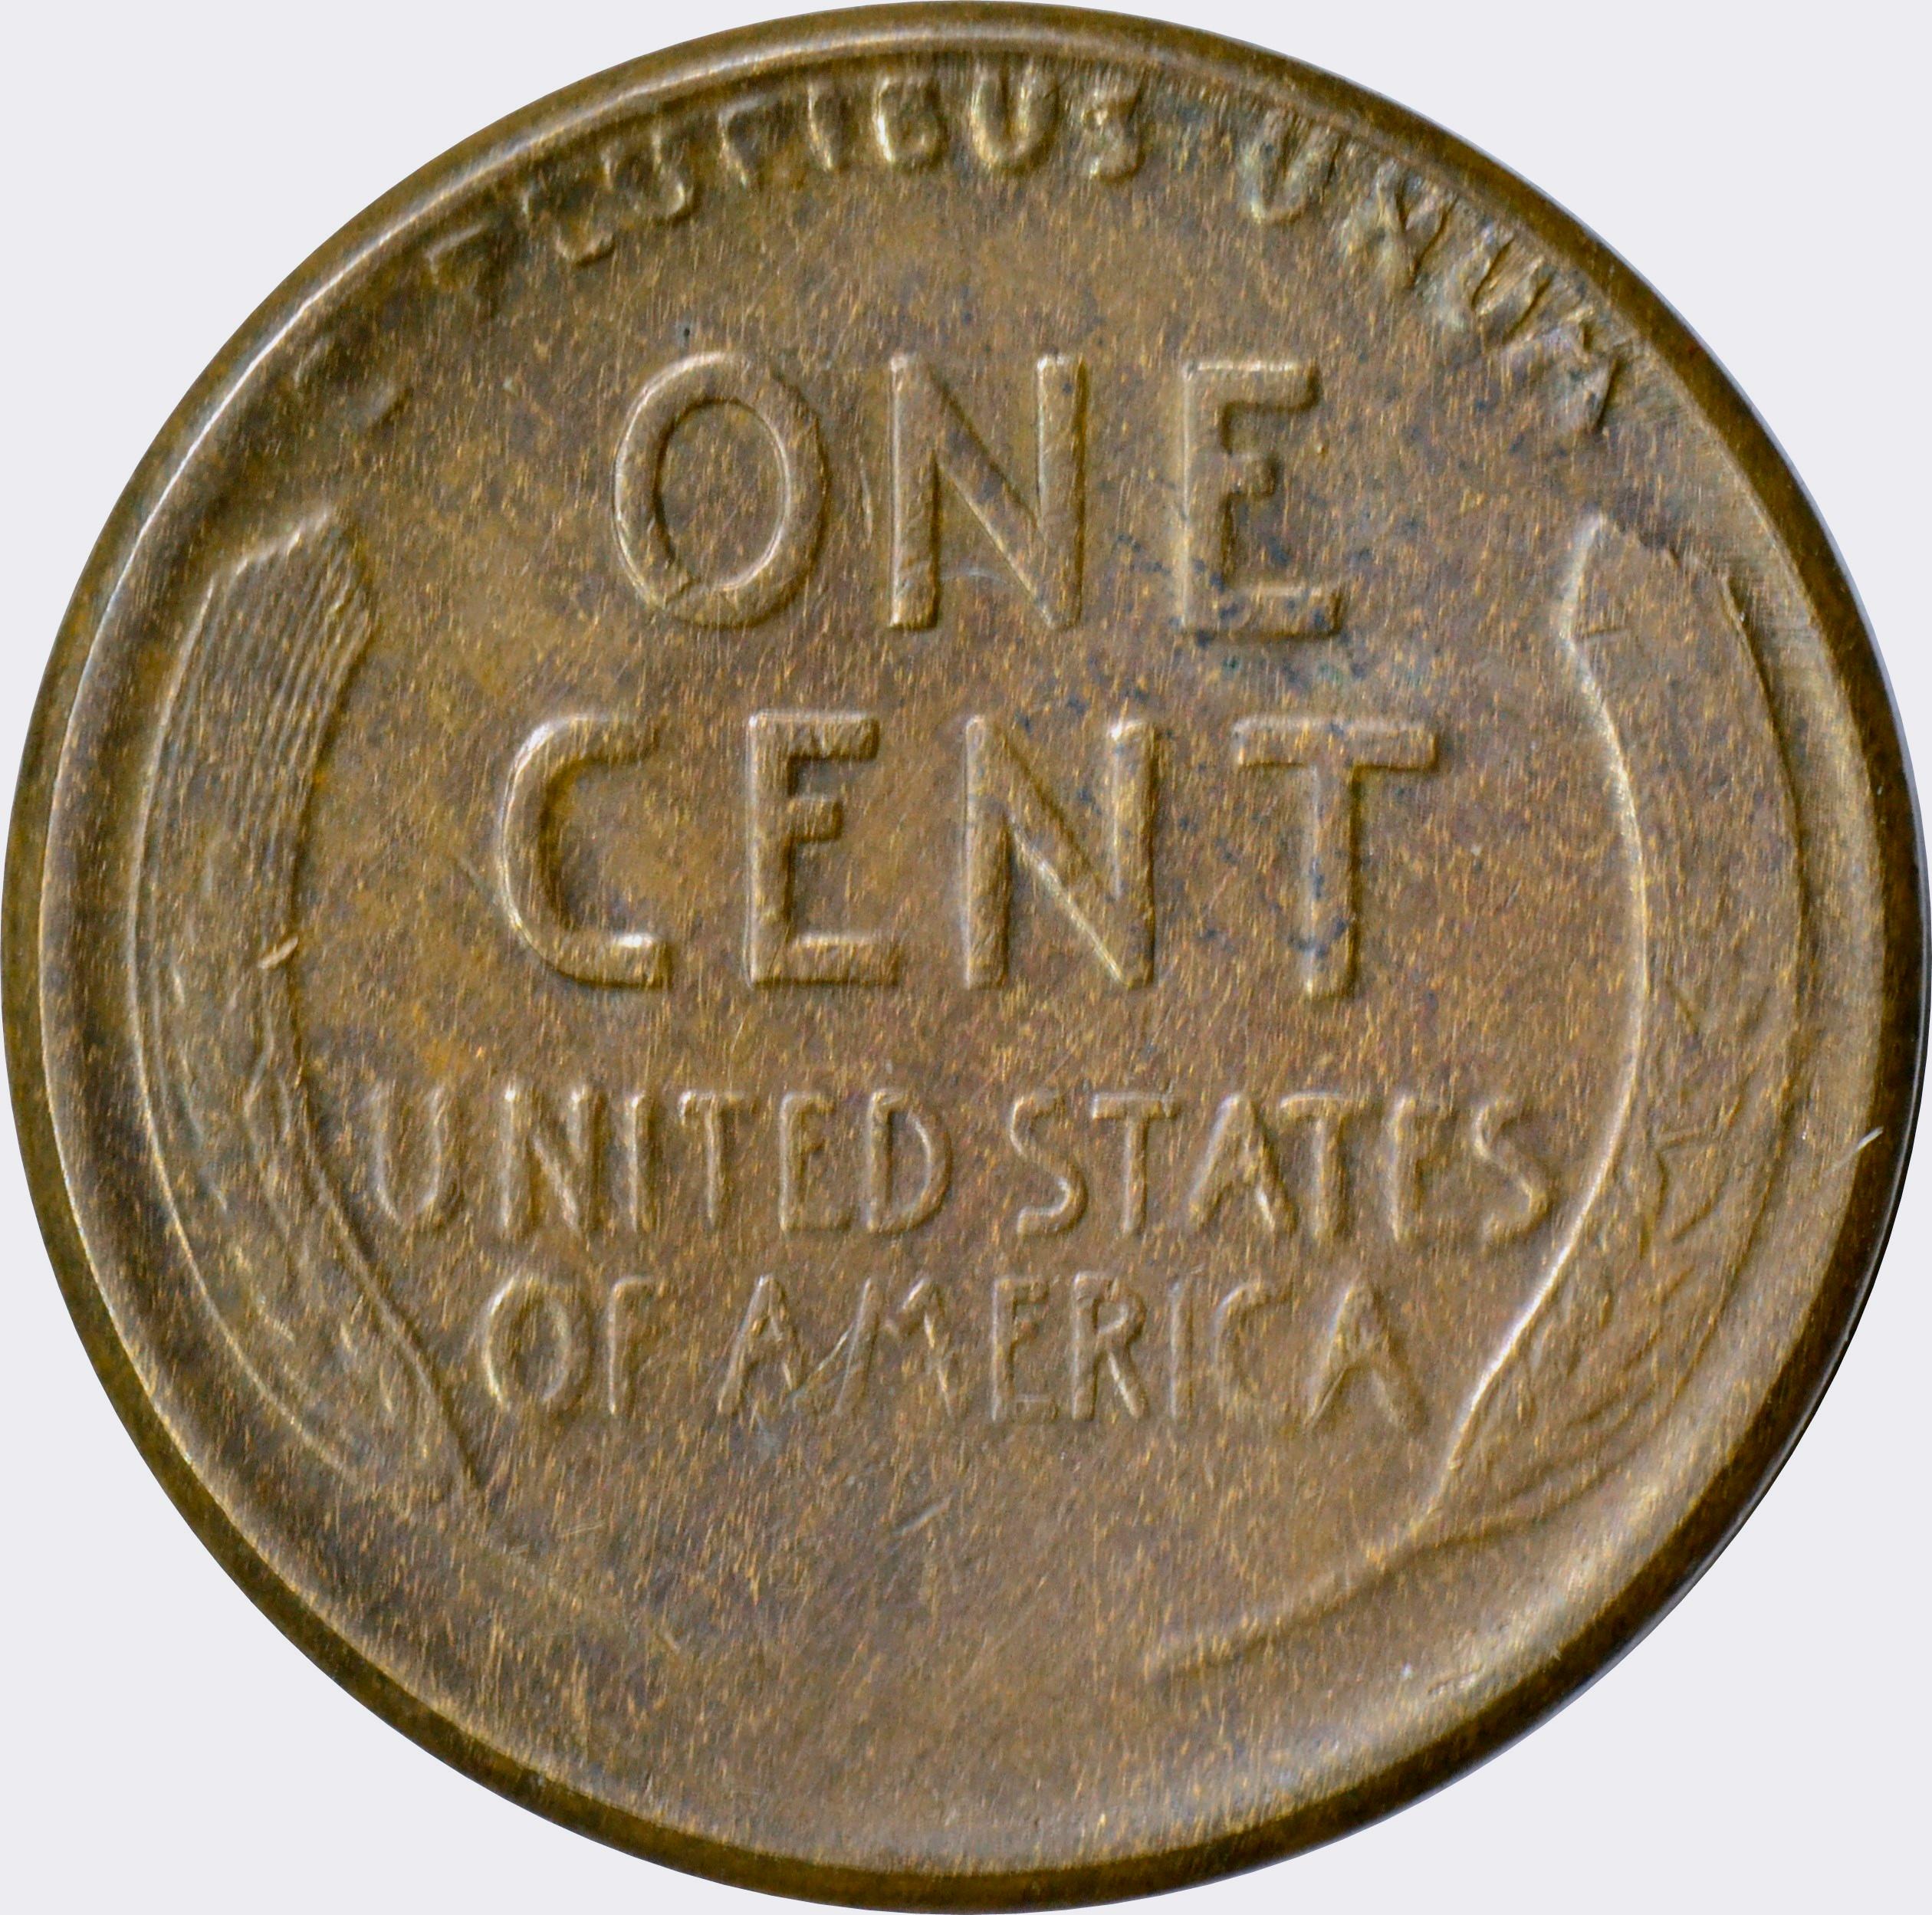 1921-S LINCOLN CENT